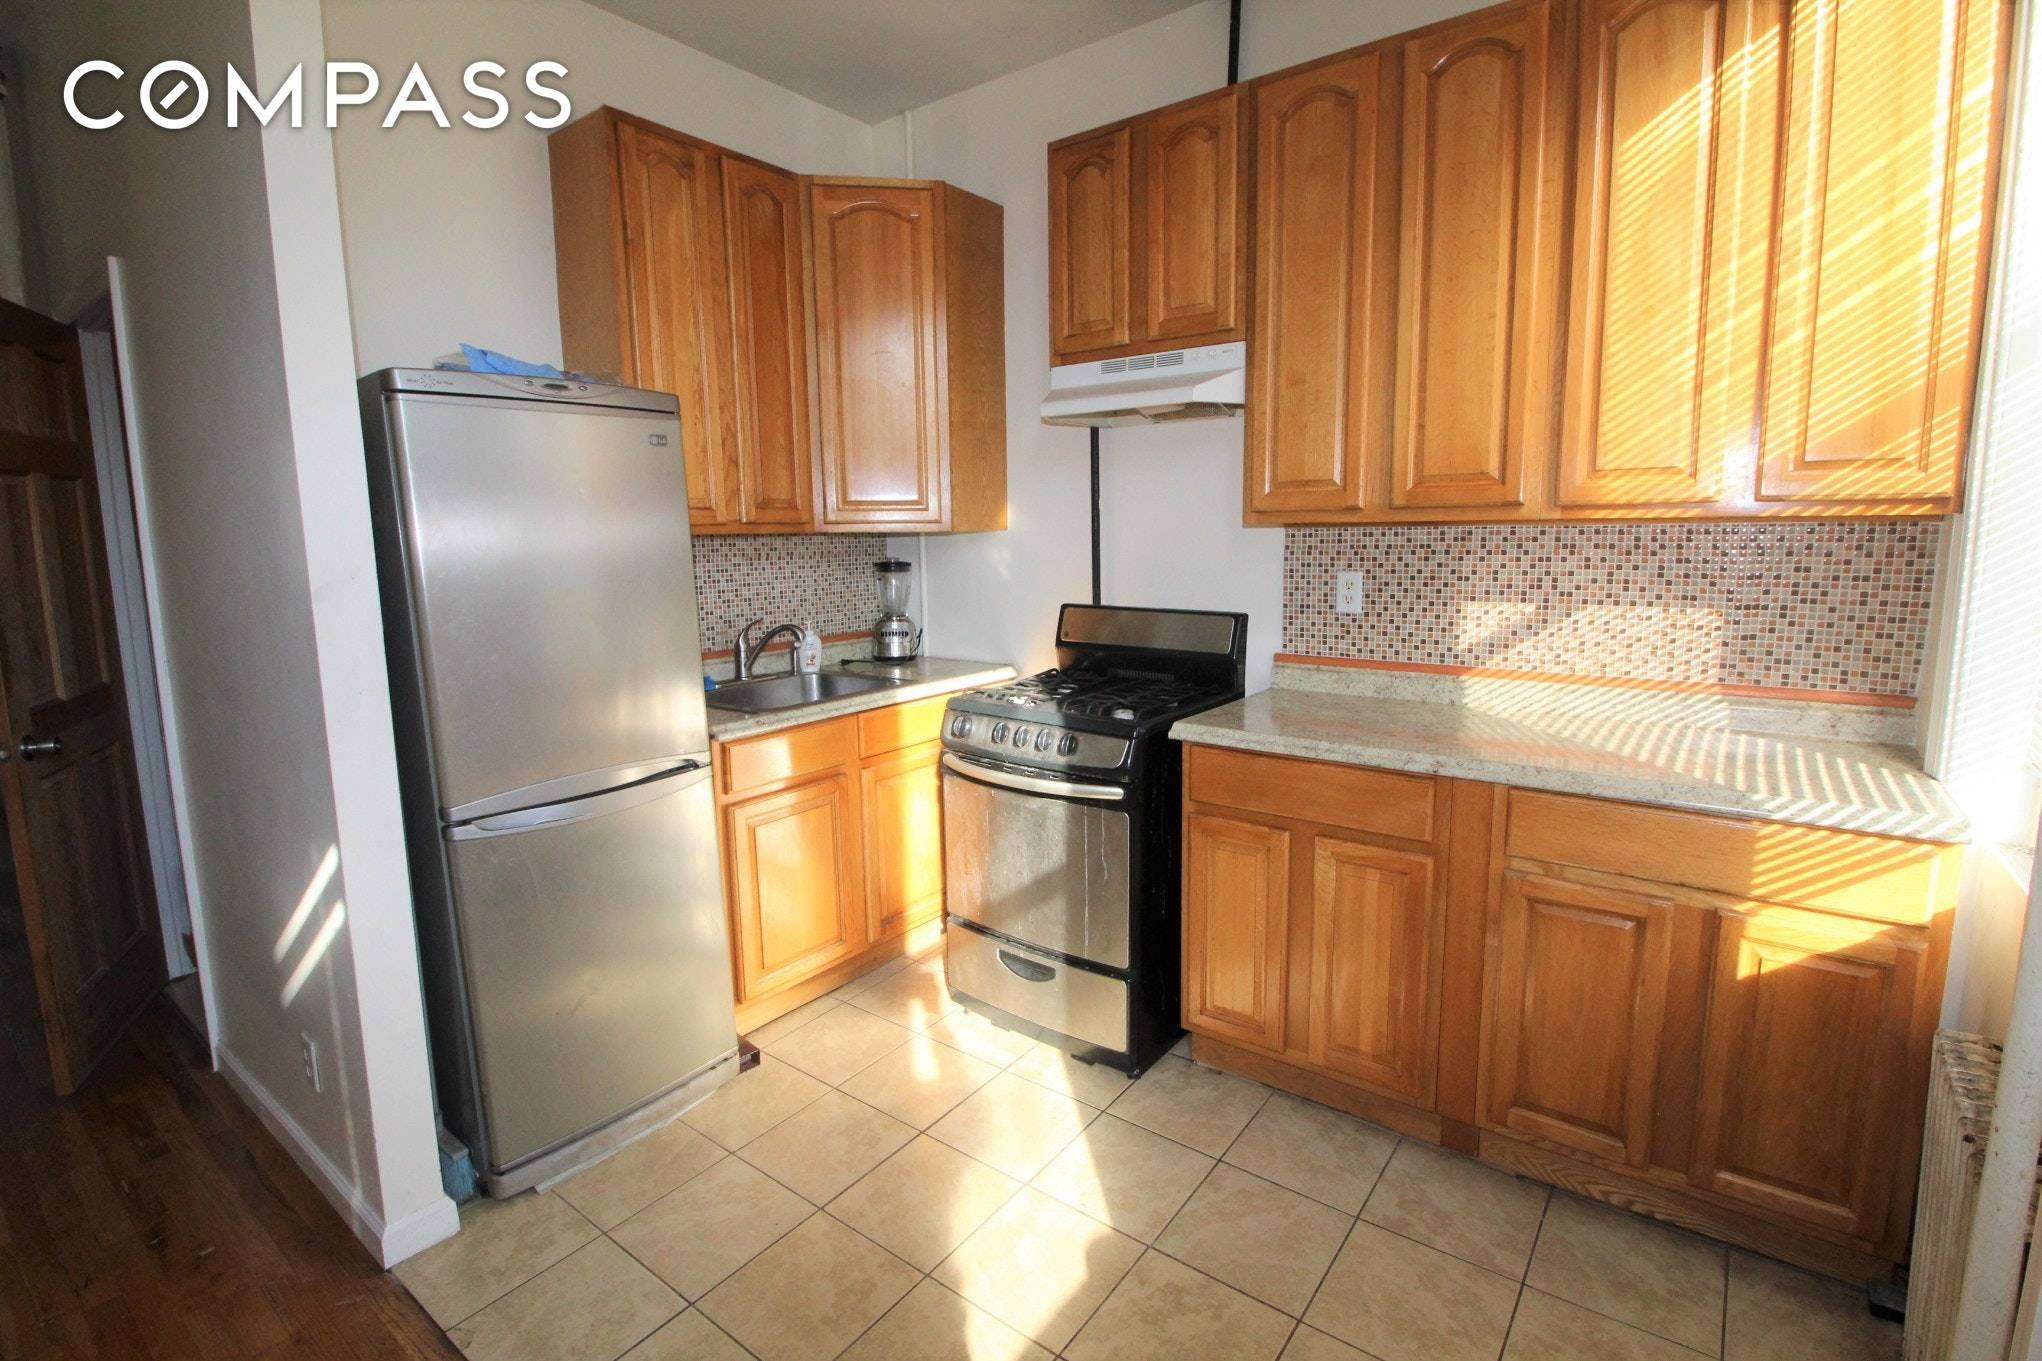 Located in one of the hippest parts of Brooklyn, this cozy two bedroom is perfect for someone looking for a fast and easy commute to the city.